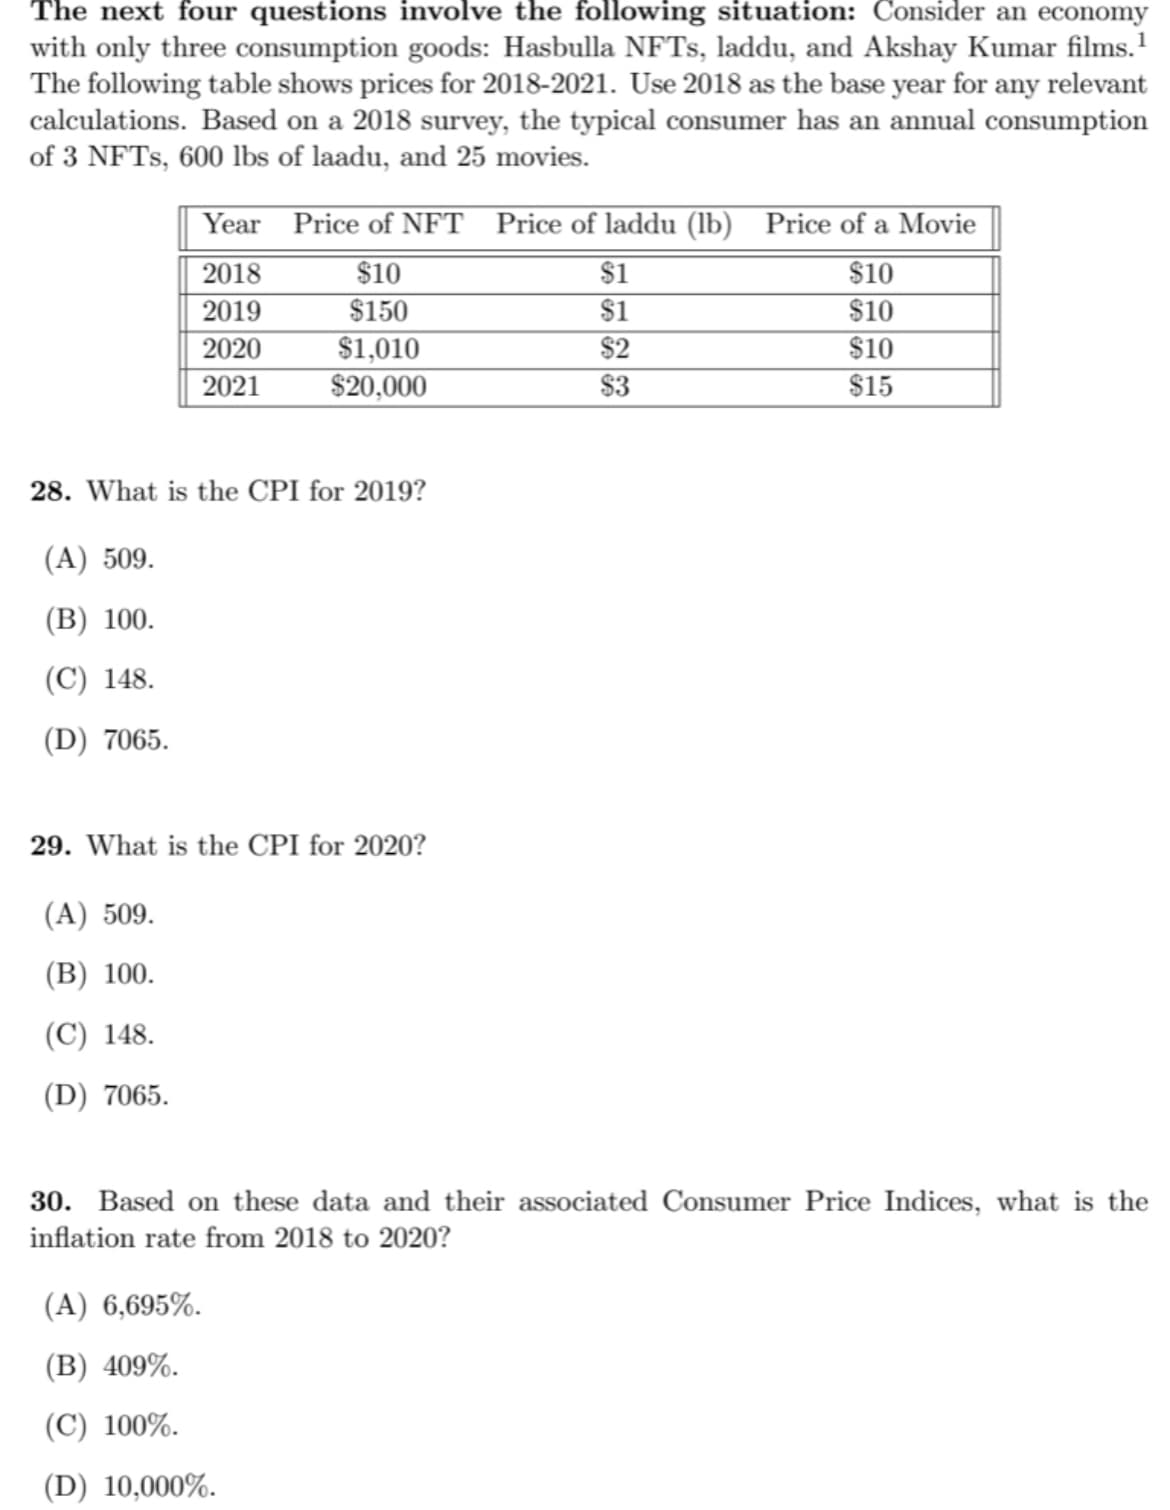 The next four questions involve the following situation: Consider an economy
with only three consumption goods: Hasbulla NFTS, laddu, and Akshay Kumar films.'
The following table shows prices for 2018-2021. Use 2018 as the base year for any relevant
calculations. Based on a 2018 survey, the typical consumer has an annual consumption
of 3 NFTS, 600 lbs of laadu, and 25 movies.
Year Price of NFT Price of laddu (lb) Price of a Movie
2018
2019
2020
2021
$10
$1
$10
$150
$1
$10
$2
$1,010
$20,000
$10
$3
$15
28. What is the CPI for 2019?
(A) 509.
(В) 100.
(C) 148.
(D) 7065.
29. What is the CPI for 2020?
(A) 509.
(В) 100.
(C) 148.
(D) 7065.
30. Based on these data and their associated Consumer Price Indices, what is the
inflation rate from 2018 to 2020?
(A) 6,695%.
(В) 409%.
(C) 100%.
(D) 10,000%.
